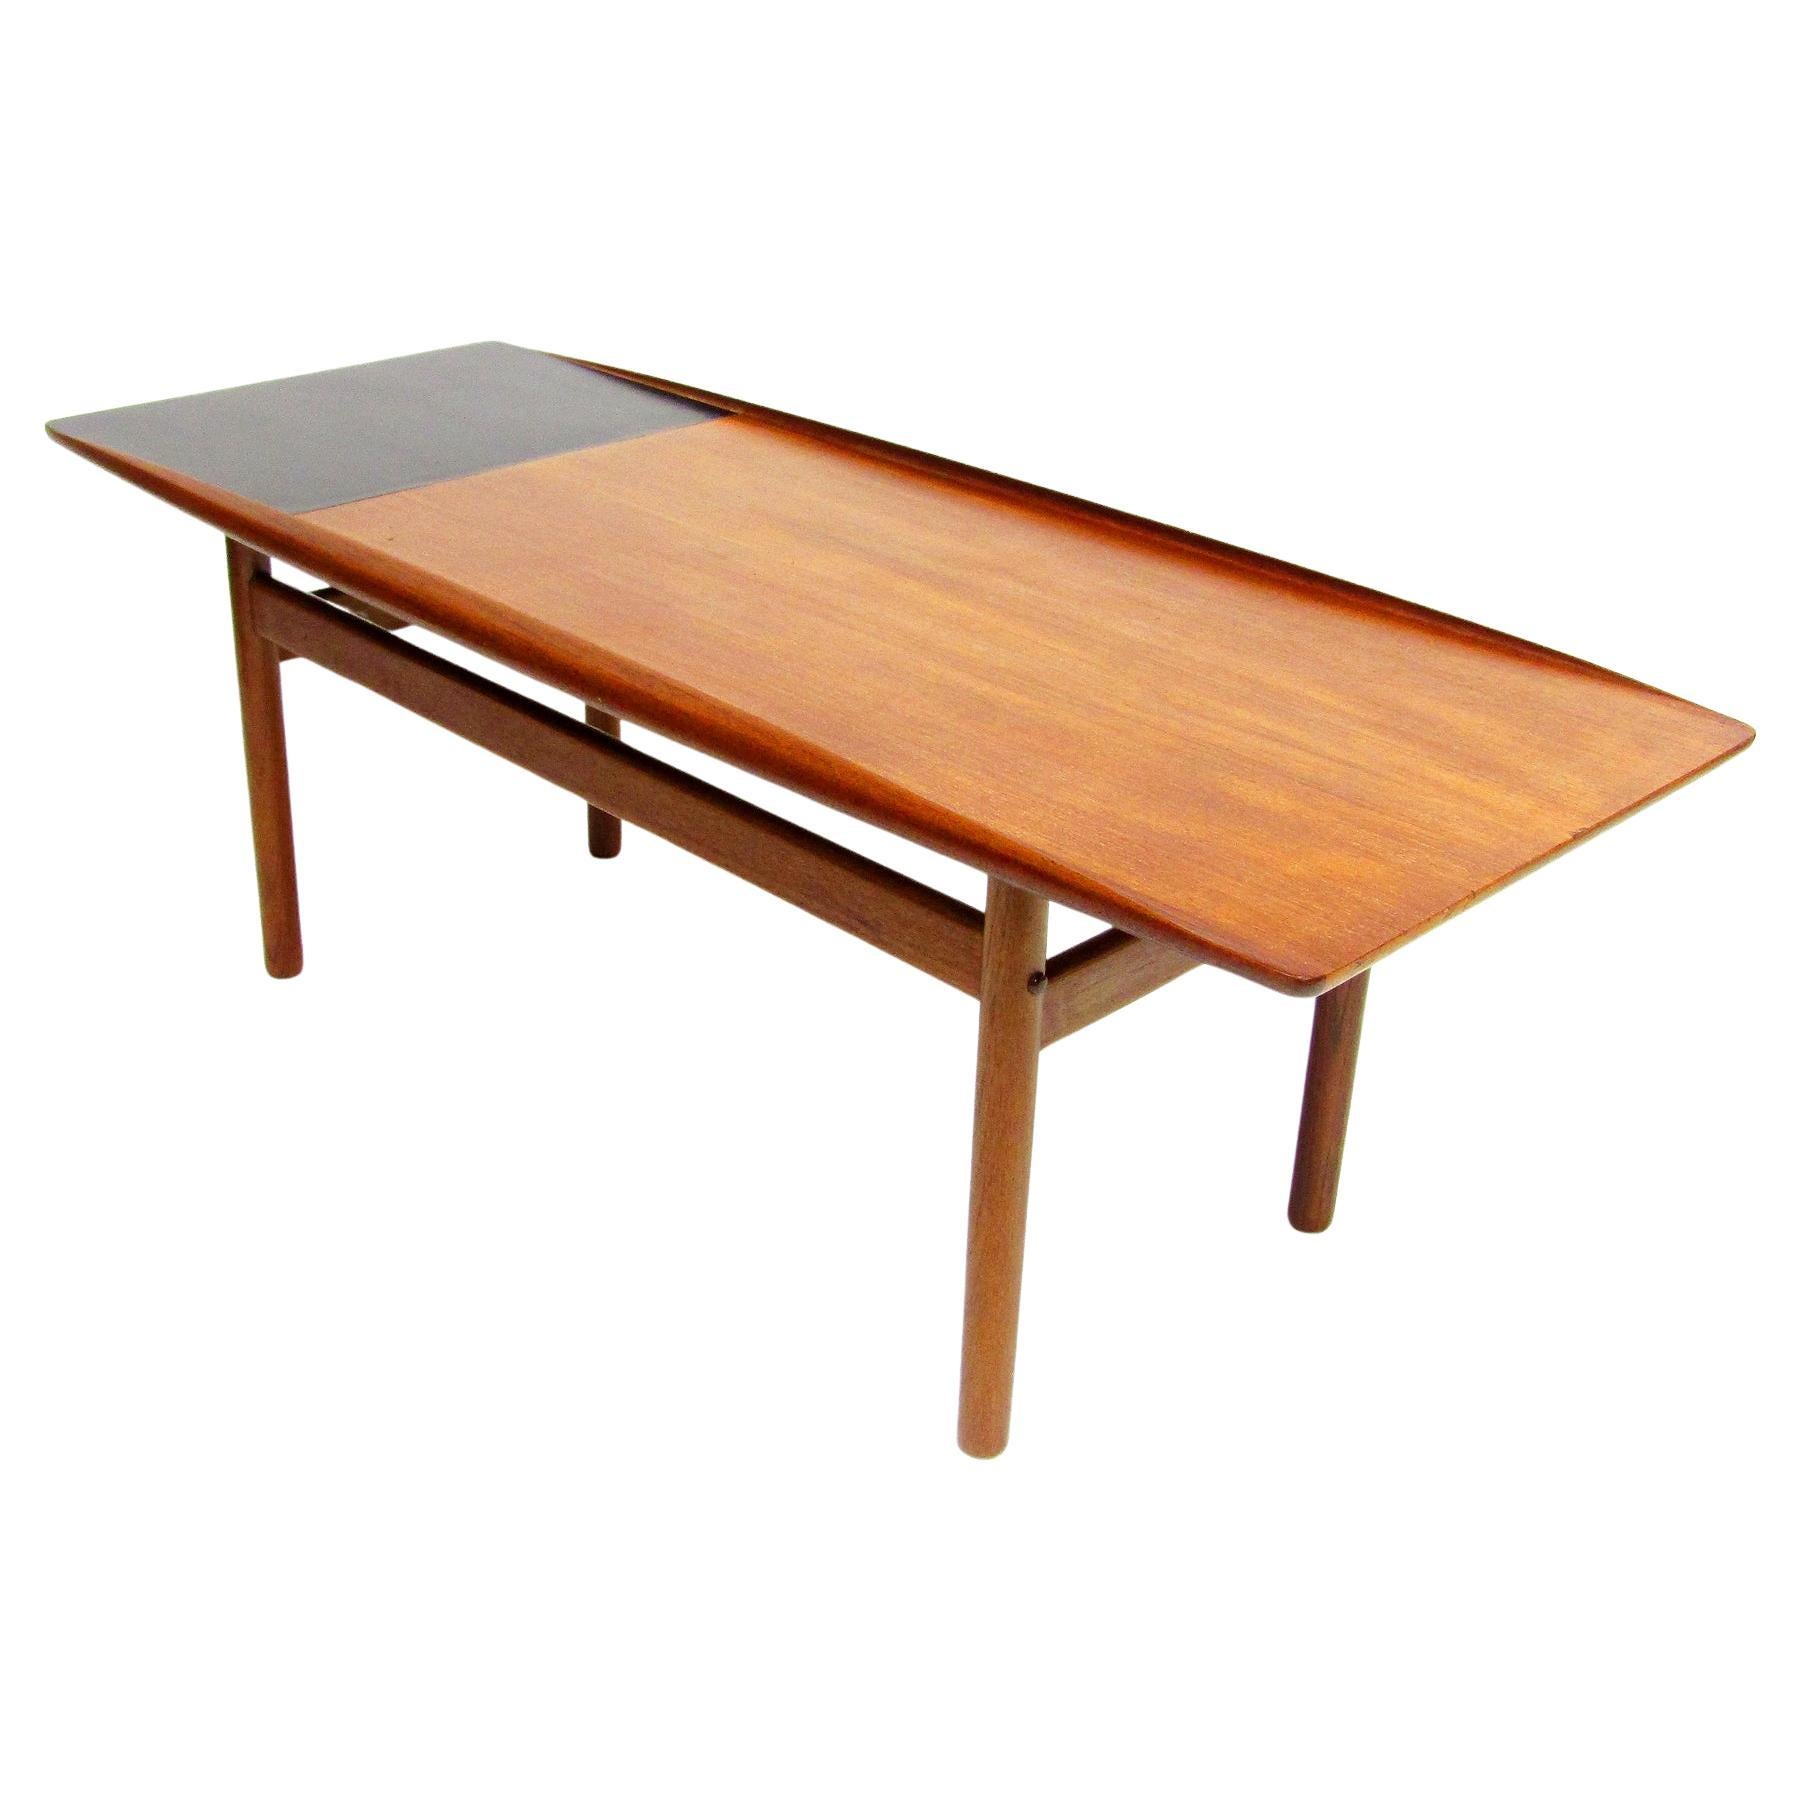 Danish 1950s Surfboard Coffee Table by Grete Jalk For Sale